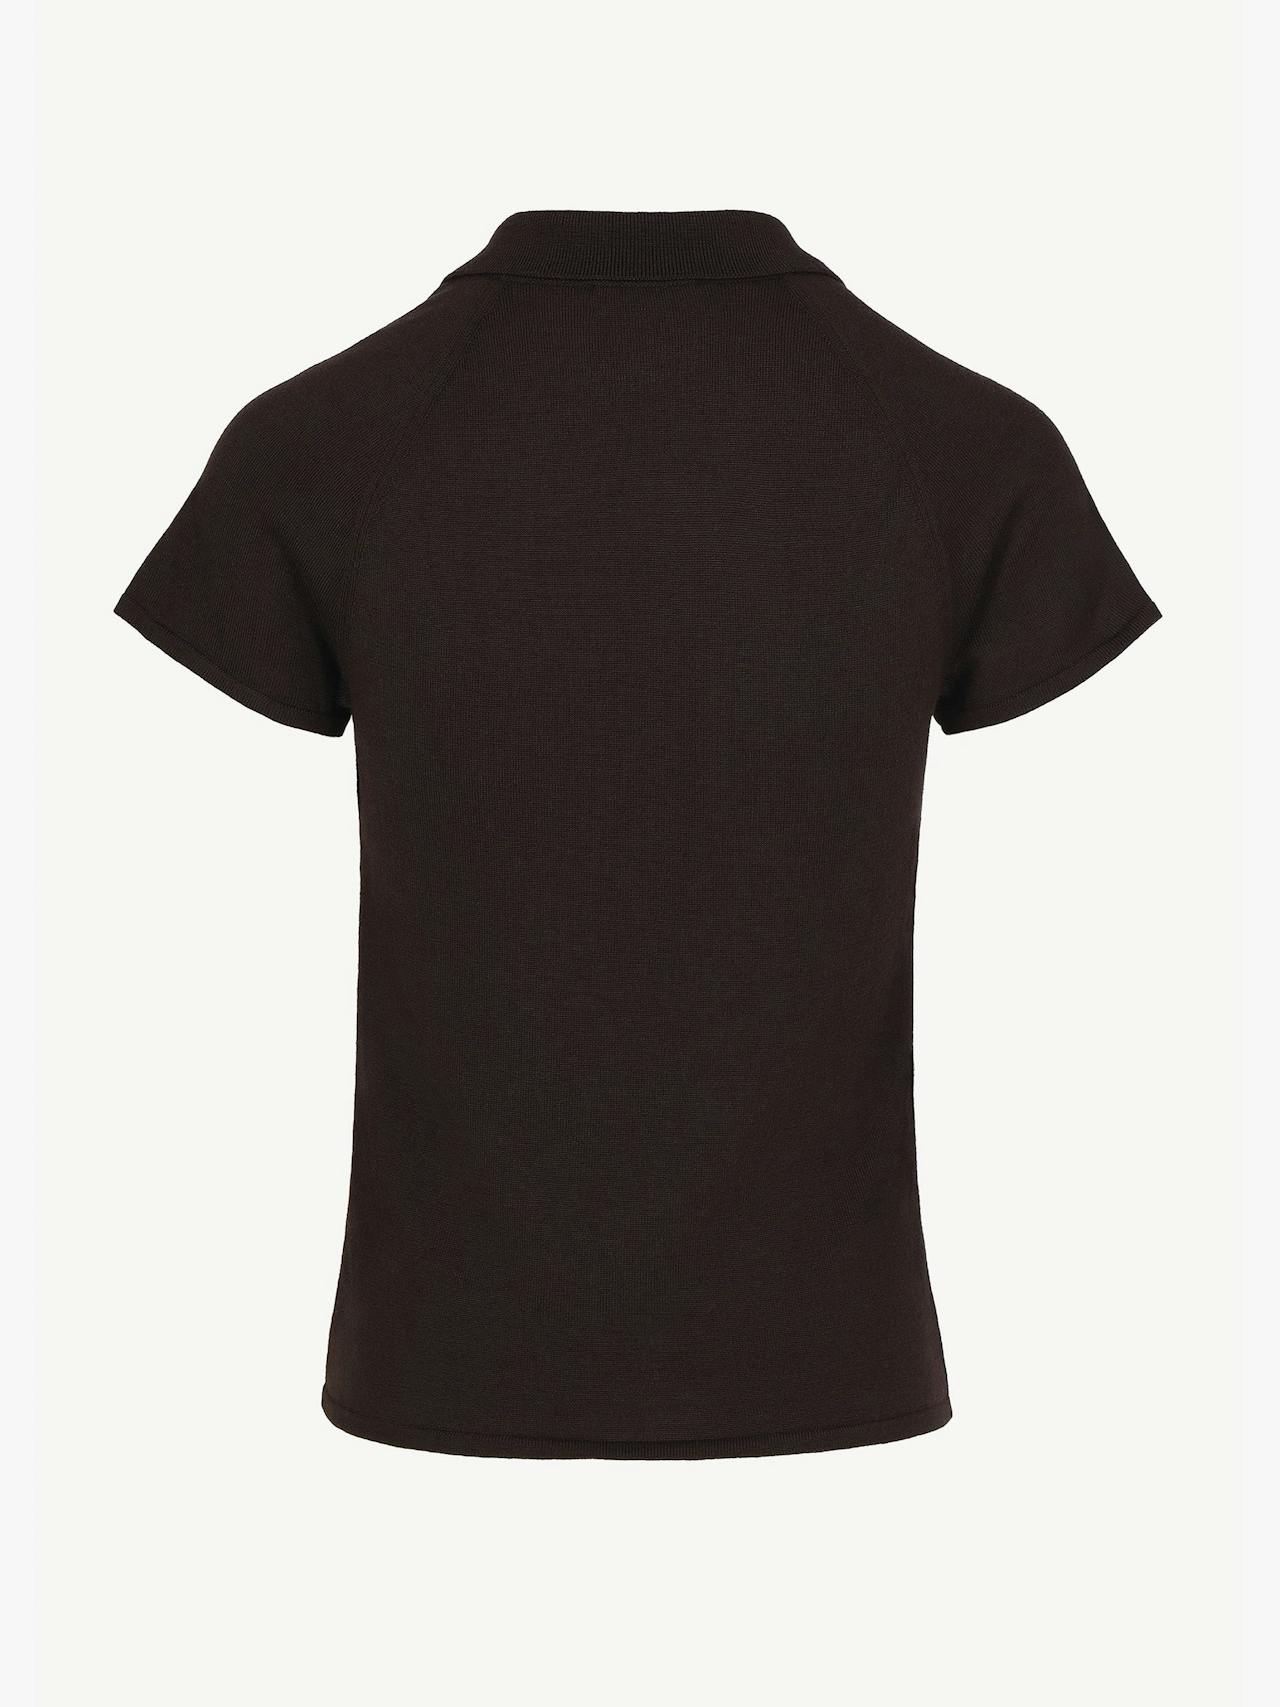 This Issue Twelve top features a classic polo shape, with a collar, cap raglan sleeves and close fit that softly shapes the body. Collagerie.com